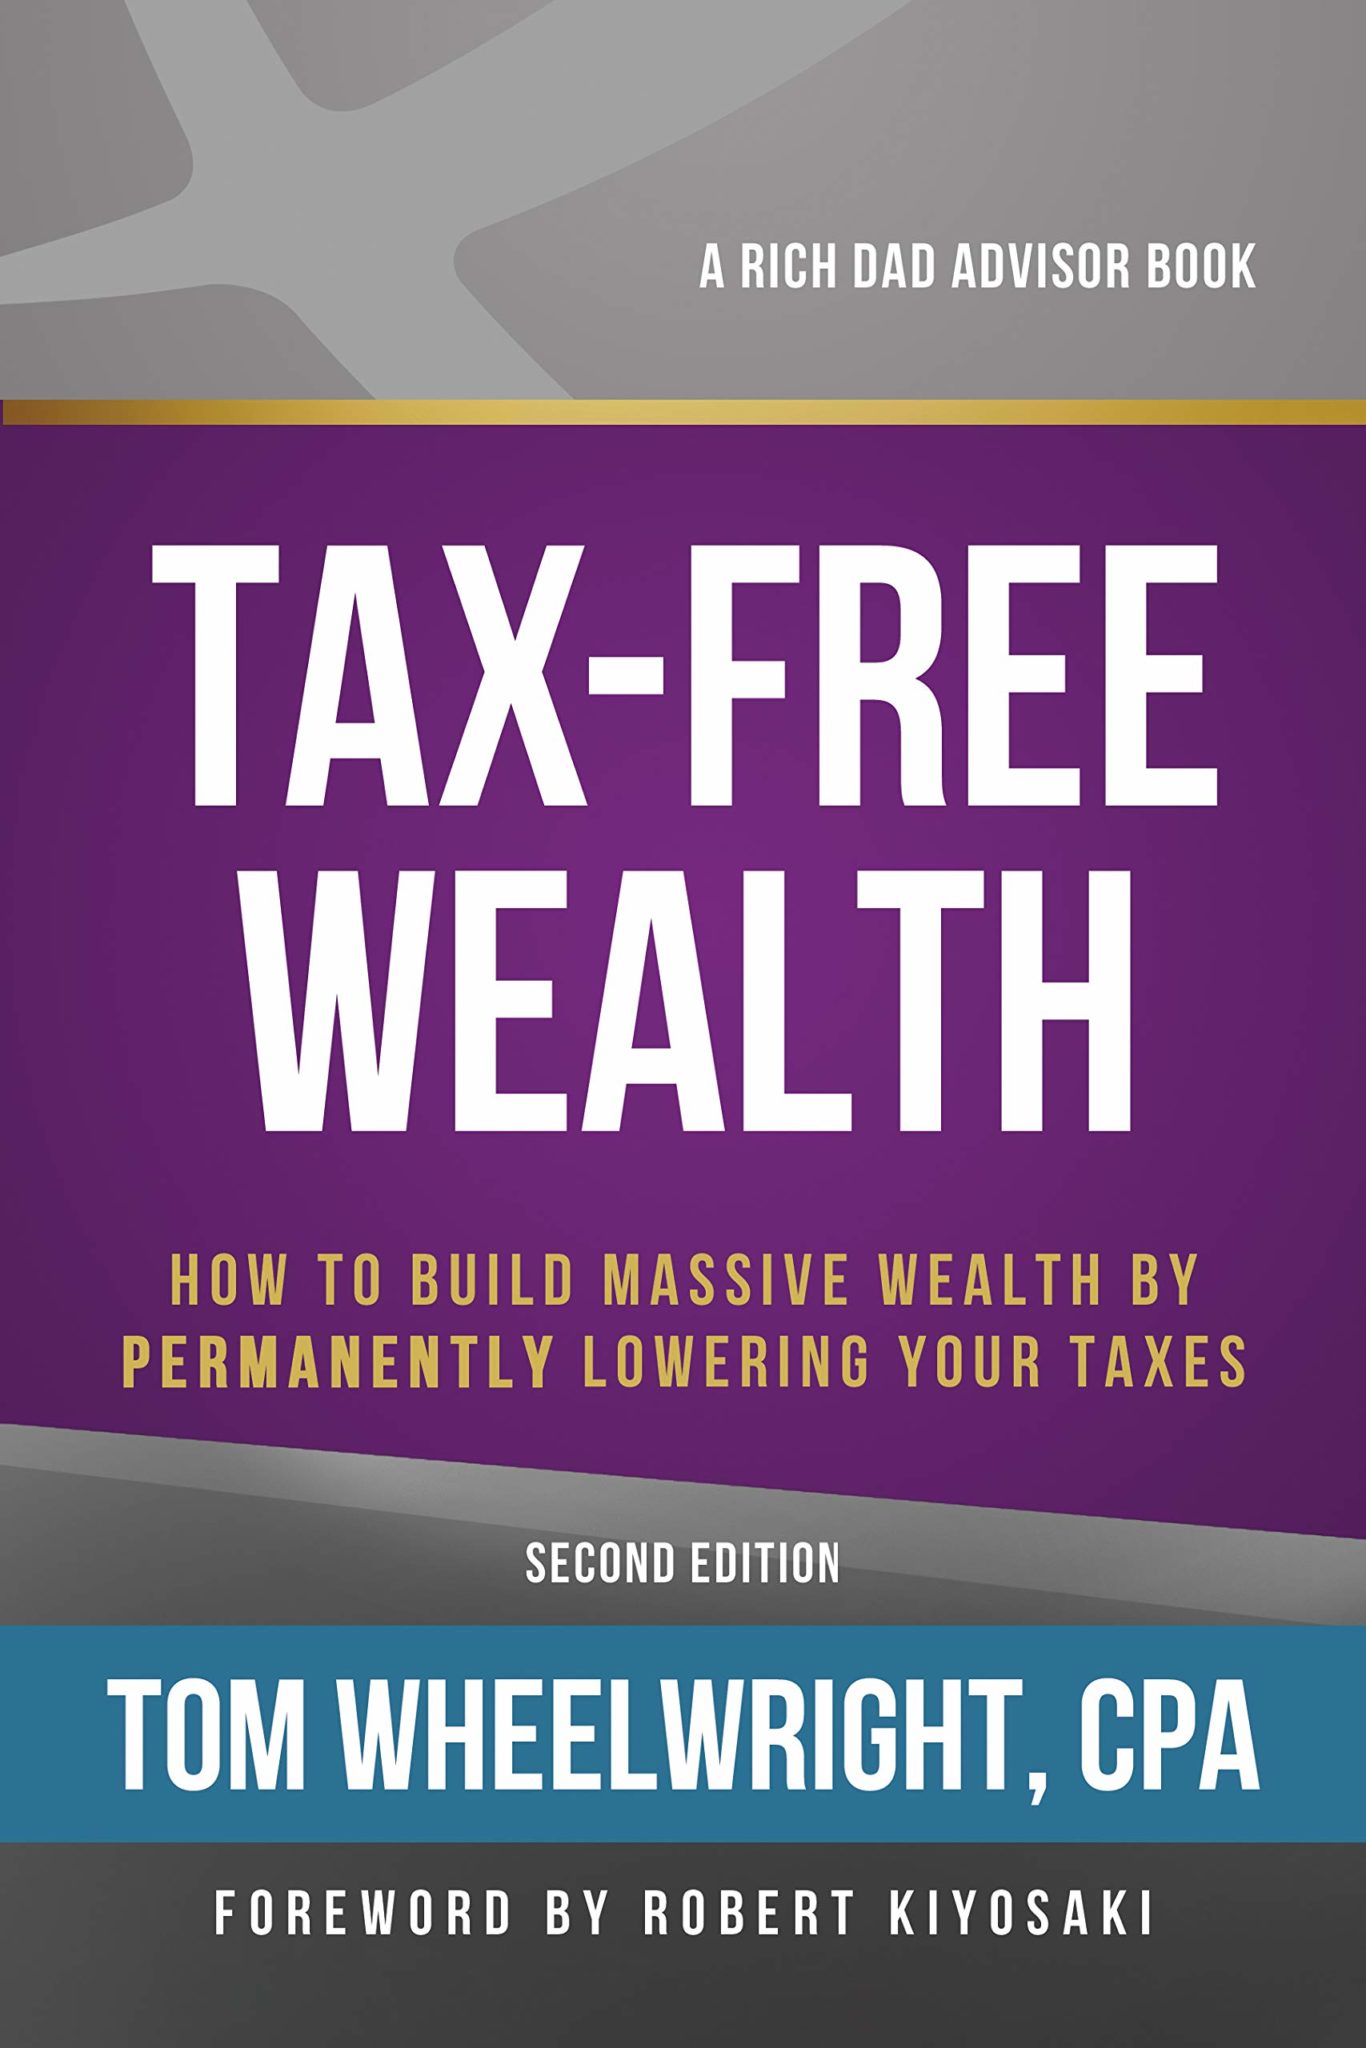 Best Real Estate Books on Taxes